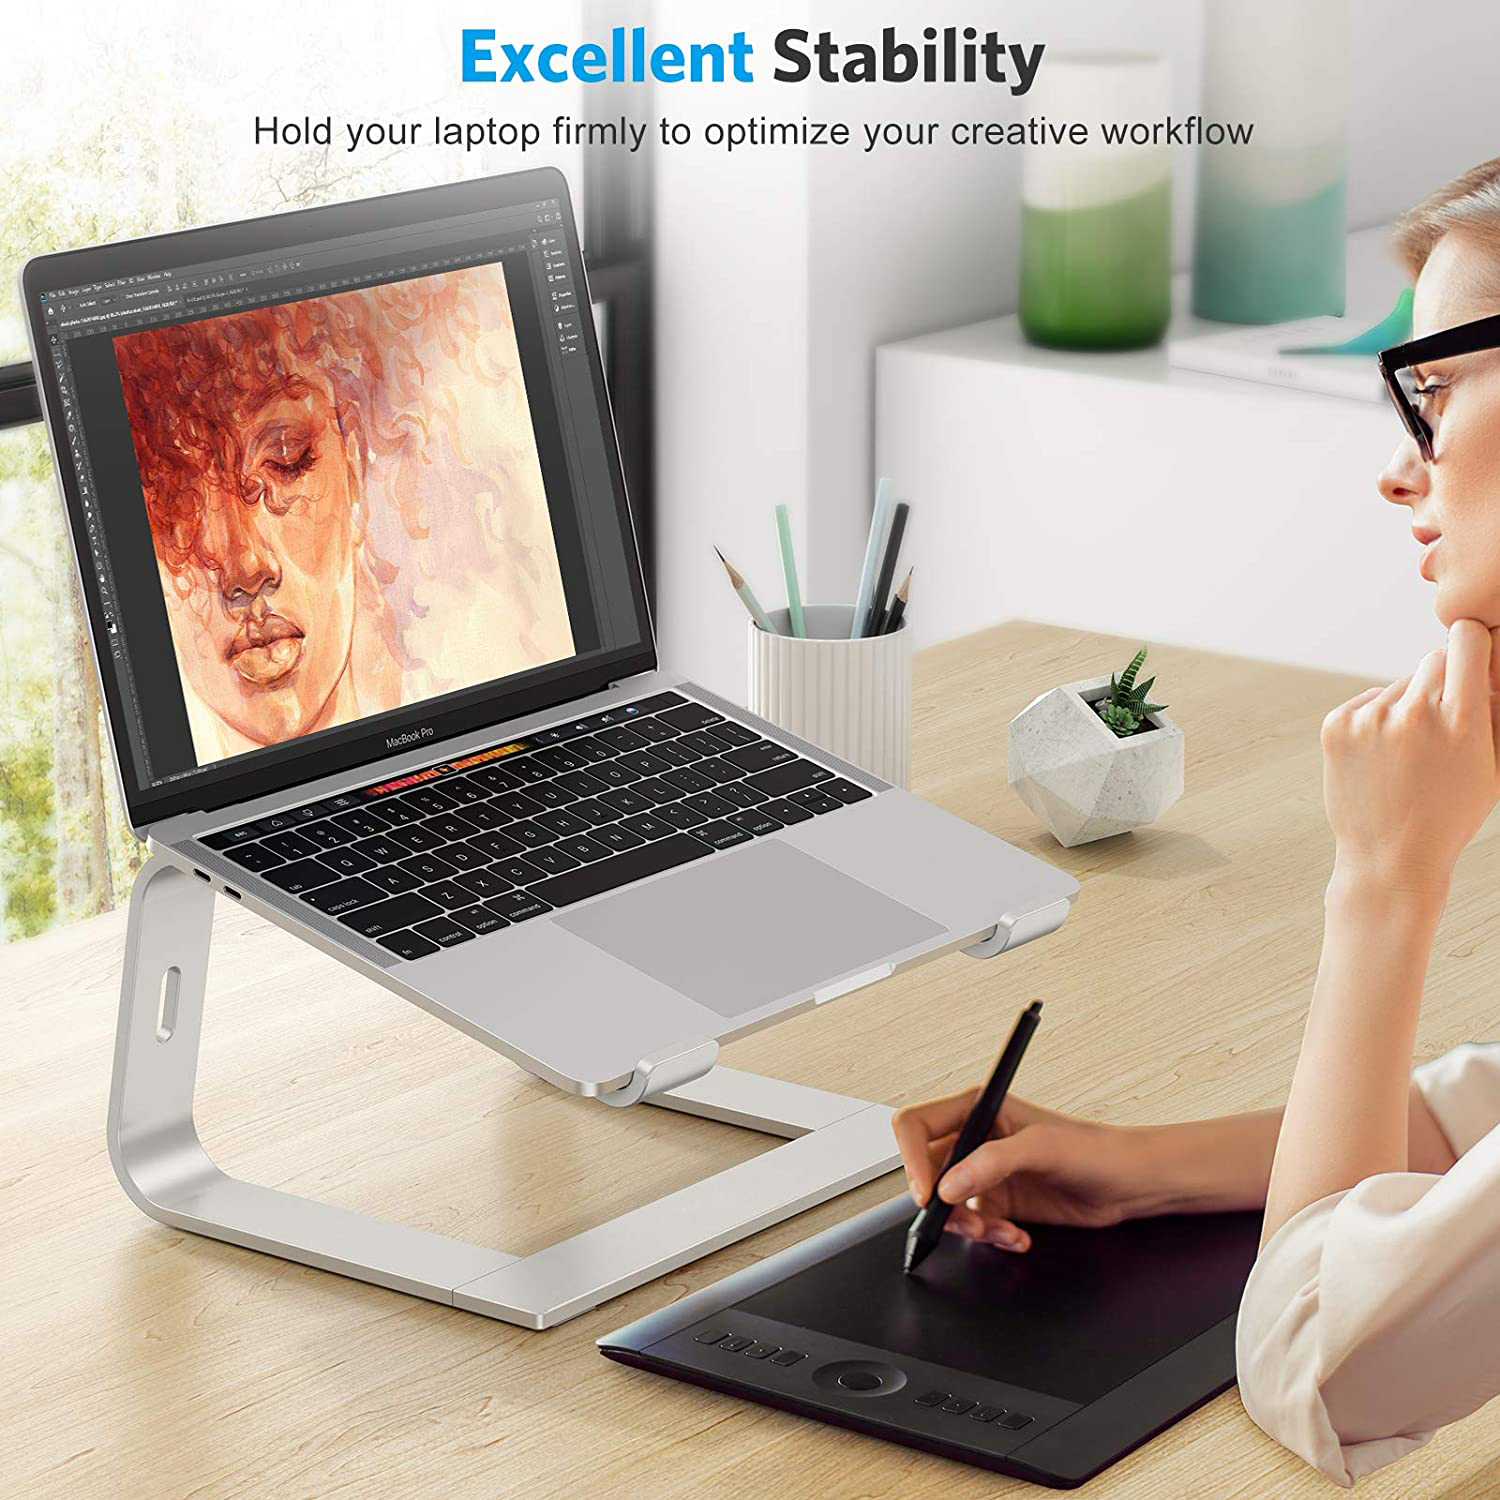 Laptop-Accessories-Laptop-Stand-Holder-Aluminum-Ergonomic-Computer-Stand-Labtop-Riser-Detachable-Notebook-Stand-Heavy-Tablet-Stand-for-10-15-6-Laptops-117